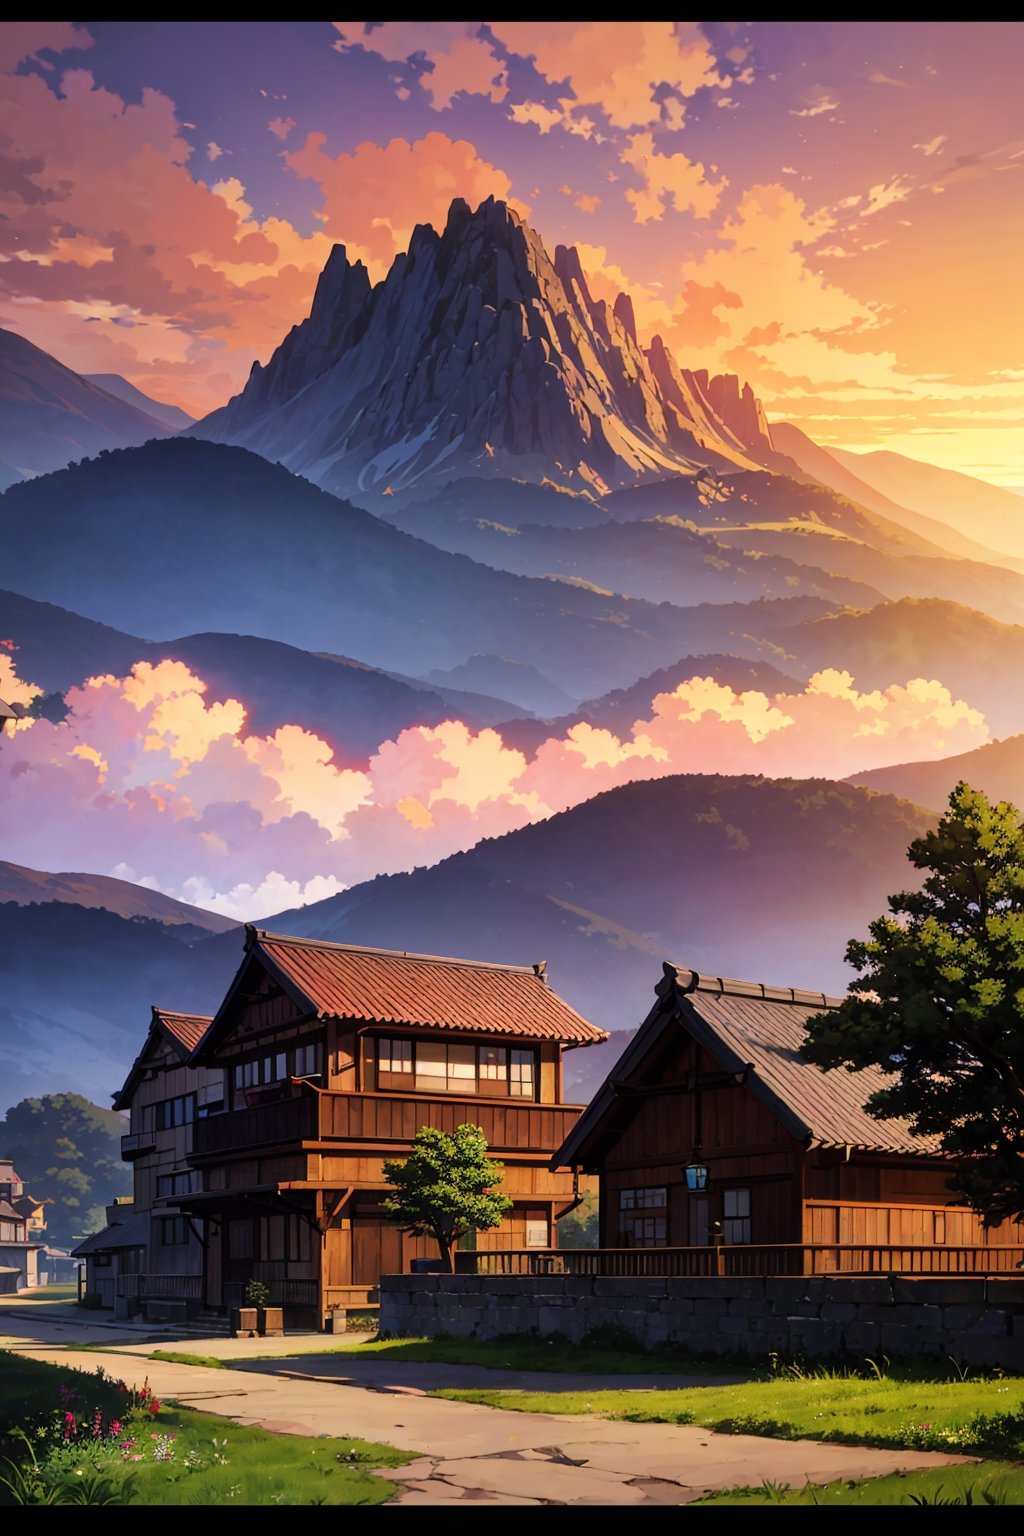 DVD screengrab from studio ghibli movie, beautiful countryside houses with mountains in the background with a pathway leading to, sunset in sky, designed by Hayao Miyazaki, retro anime, poster, digital_painting,EpicSky,6000,cloud,greg rutkowski,isometric style,FFIXBG,genshin impact